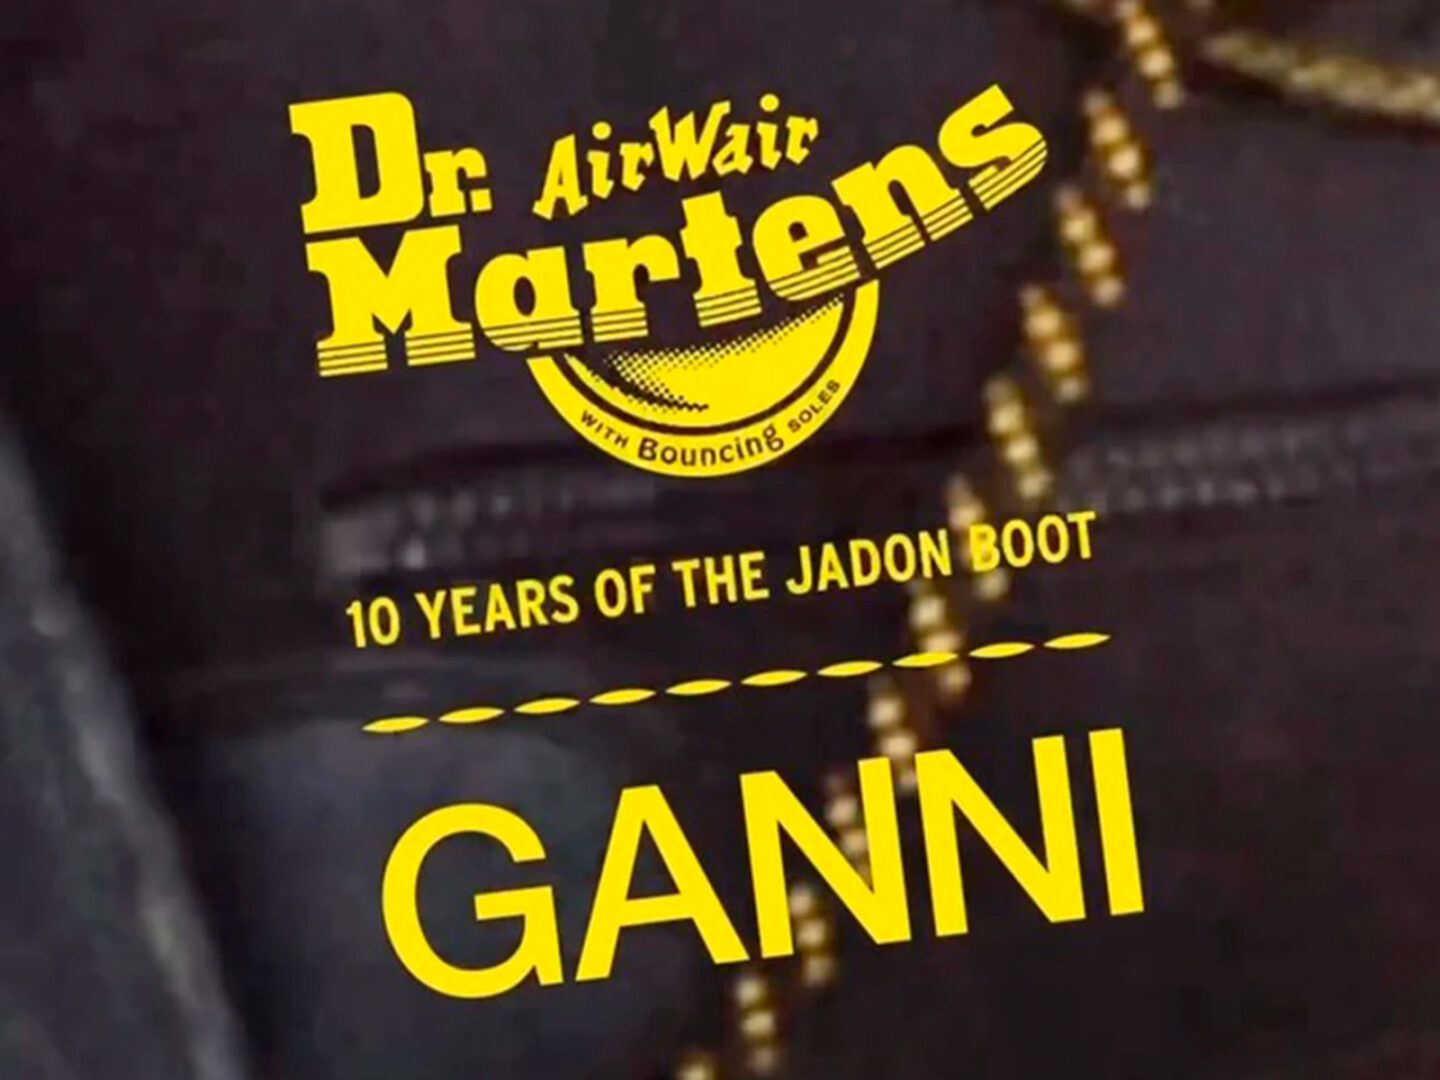 Dr. Martens and GANNI commemorate 10 years of the Jadon boot